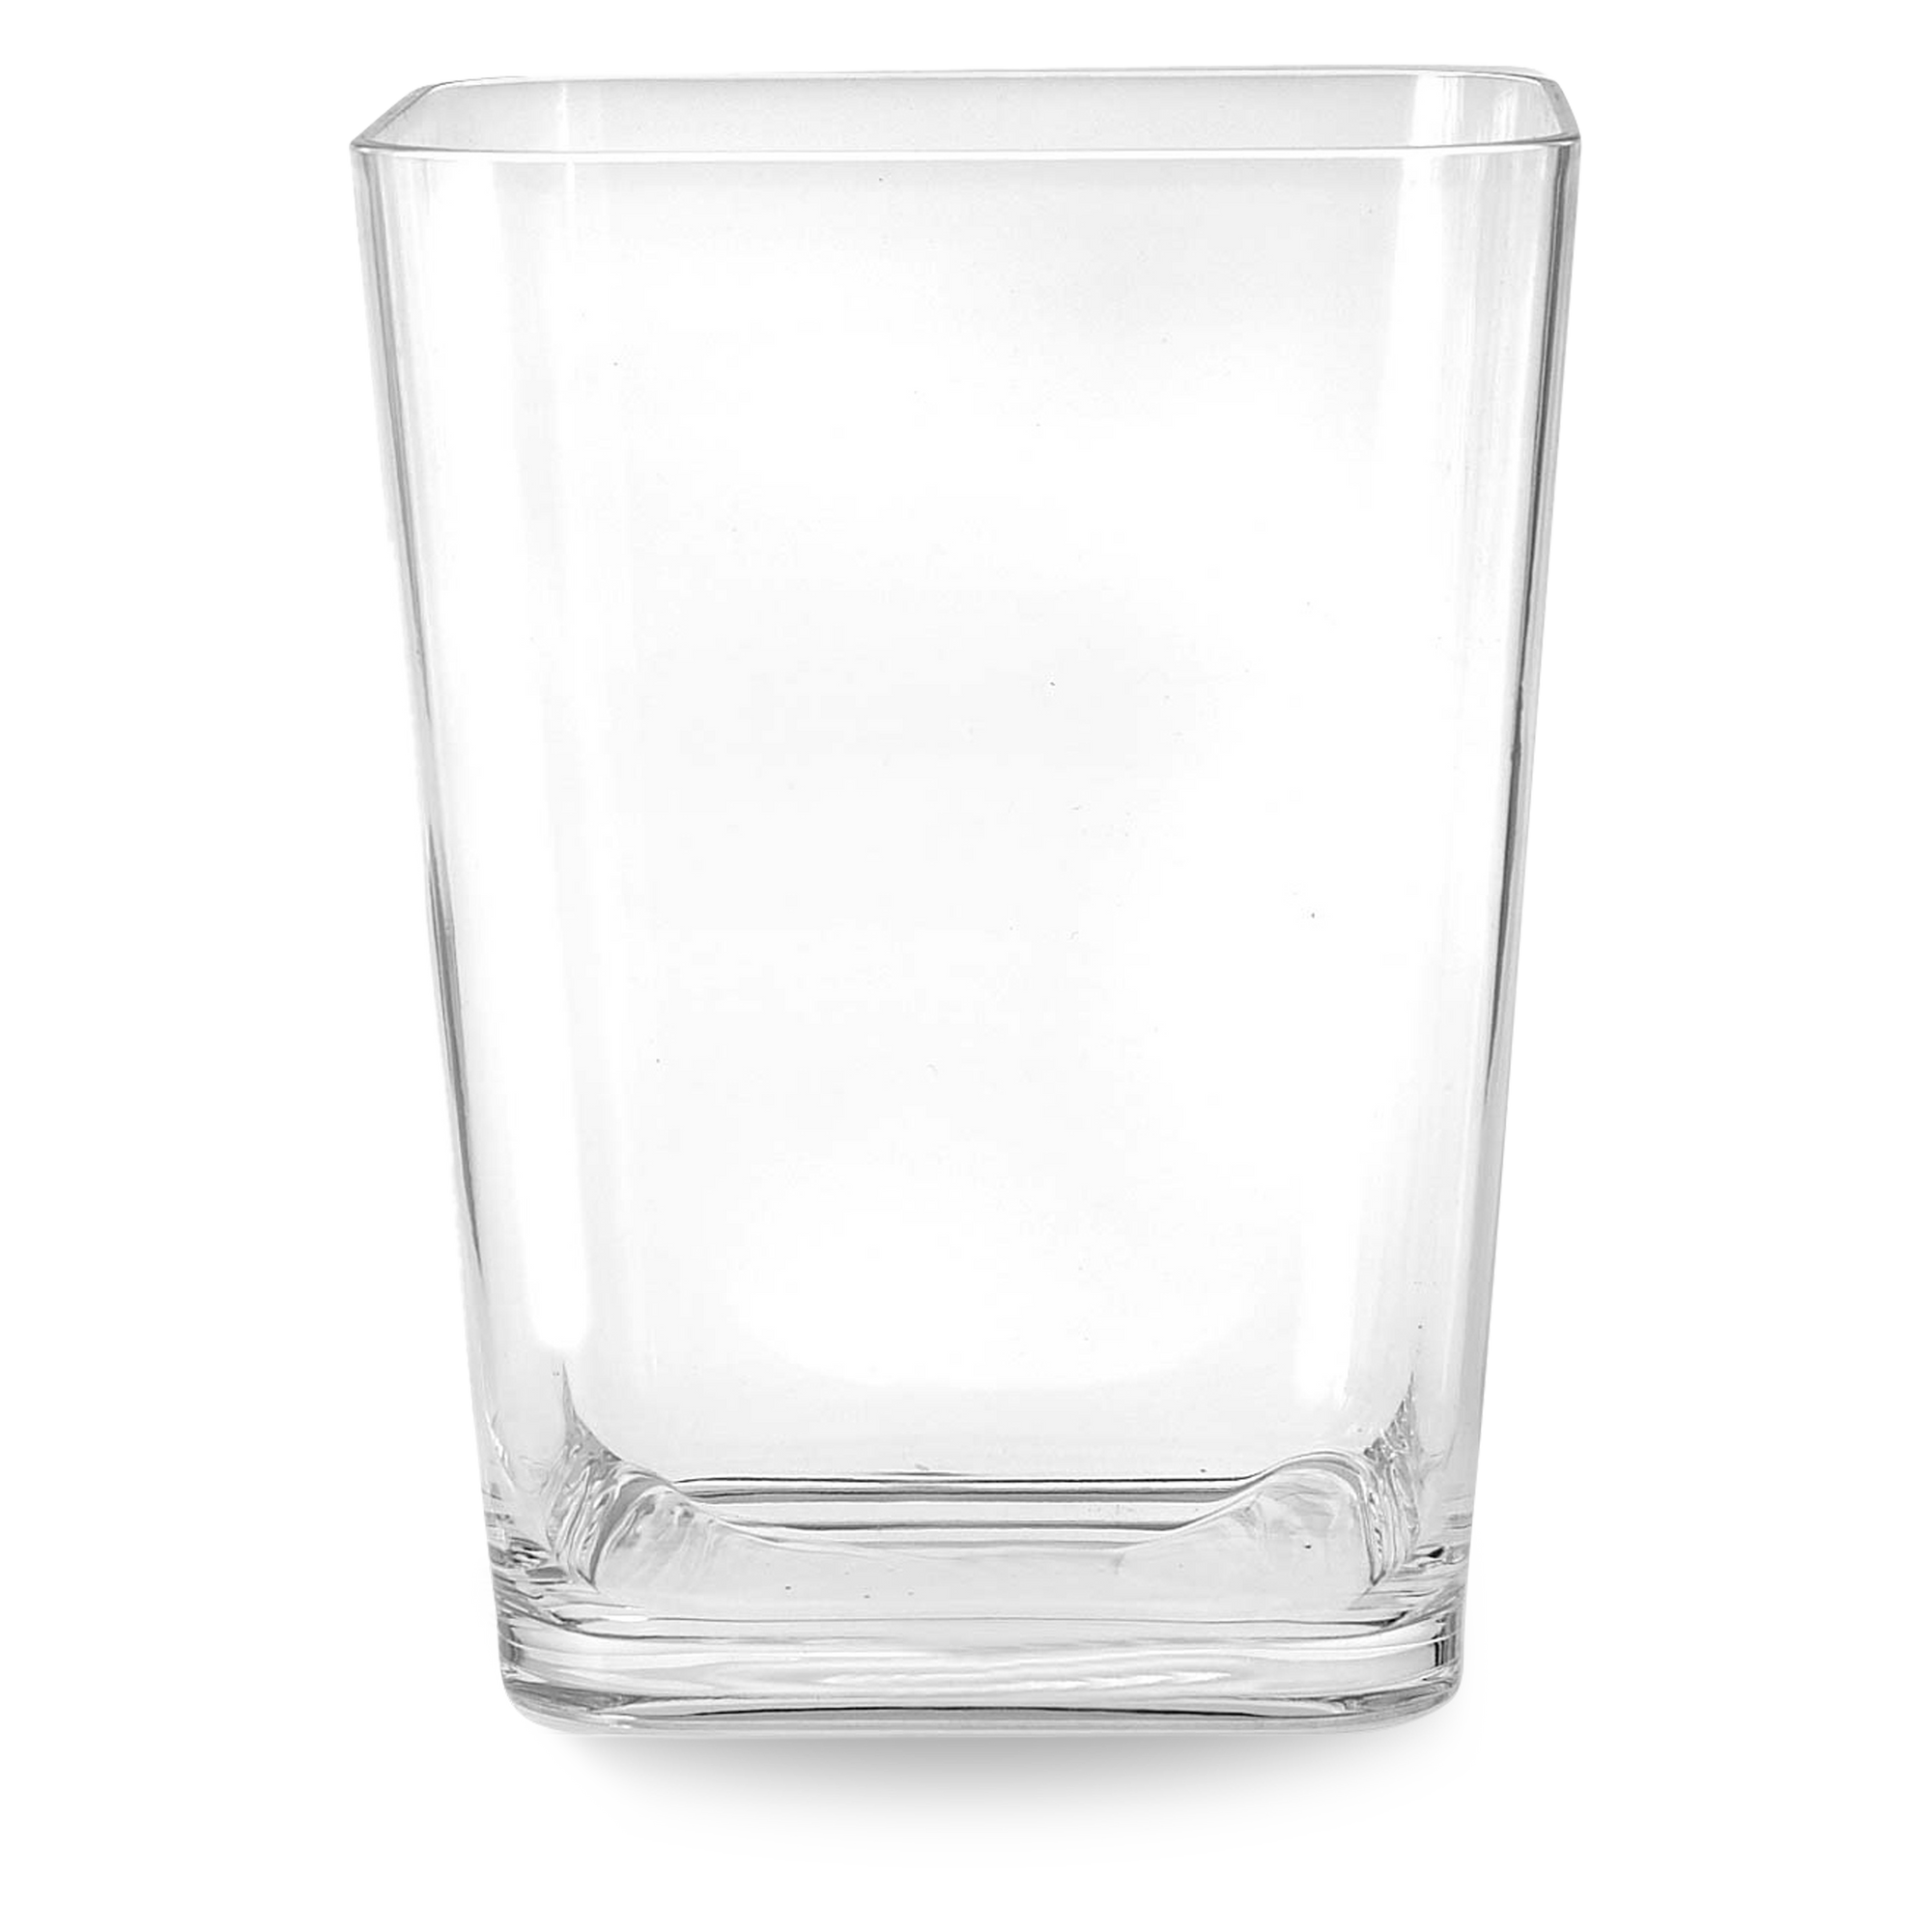 A contemporary acrylic waste basket for bedrooms, living rooms, and bathrooms.